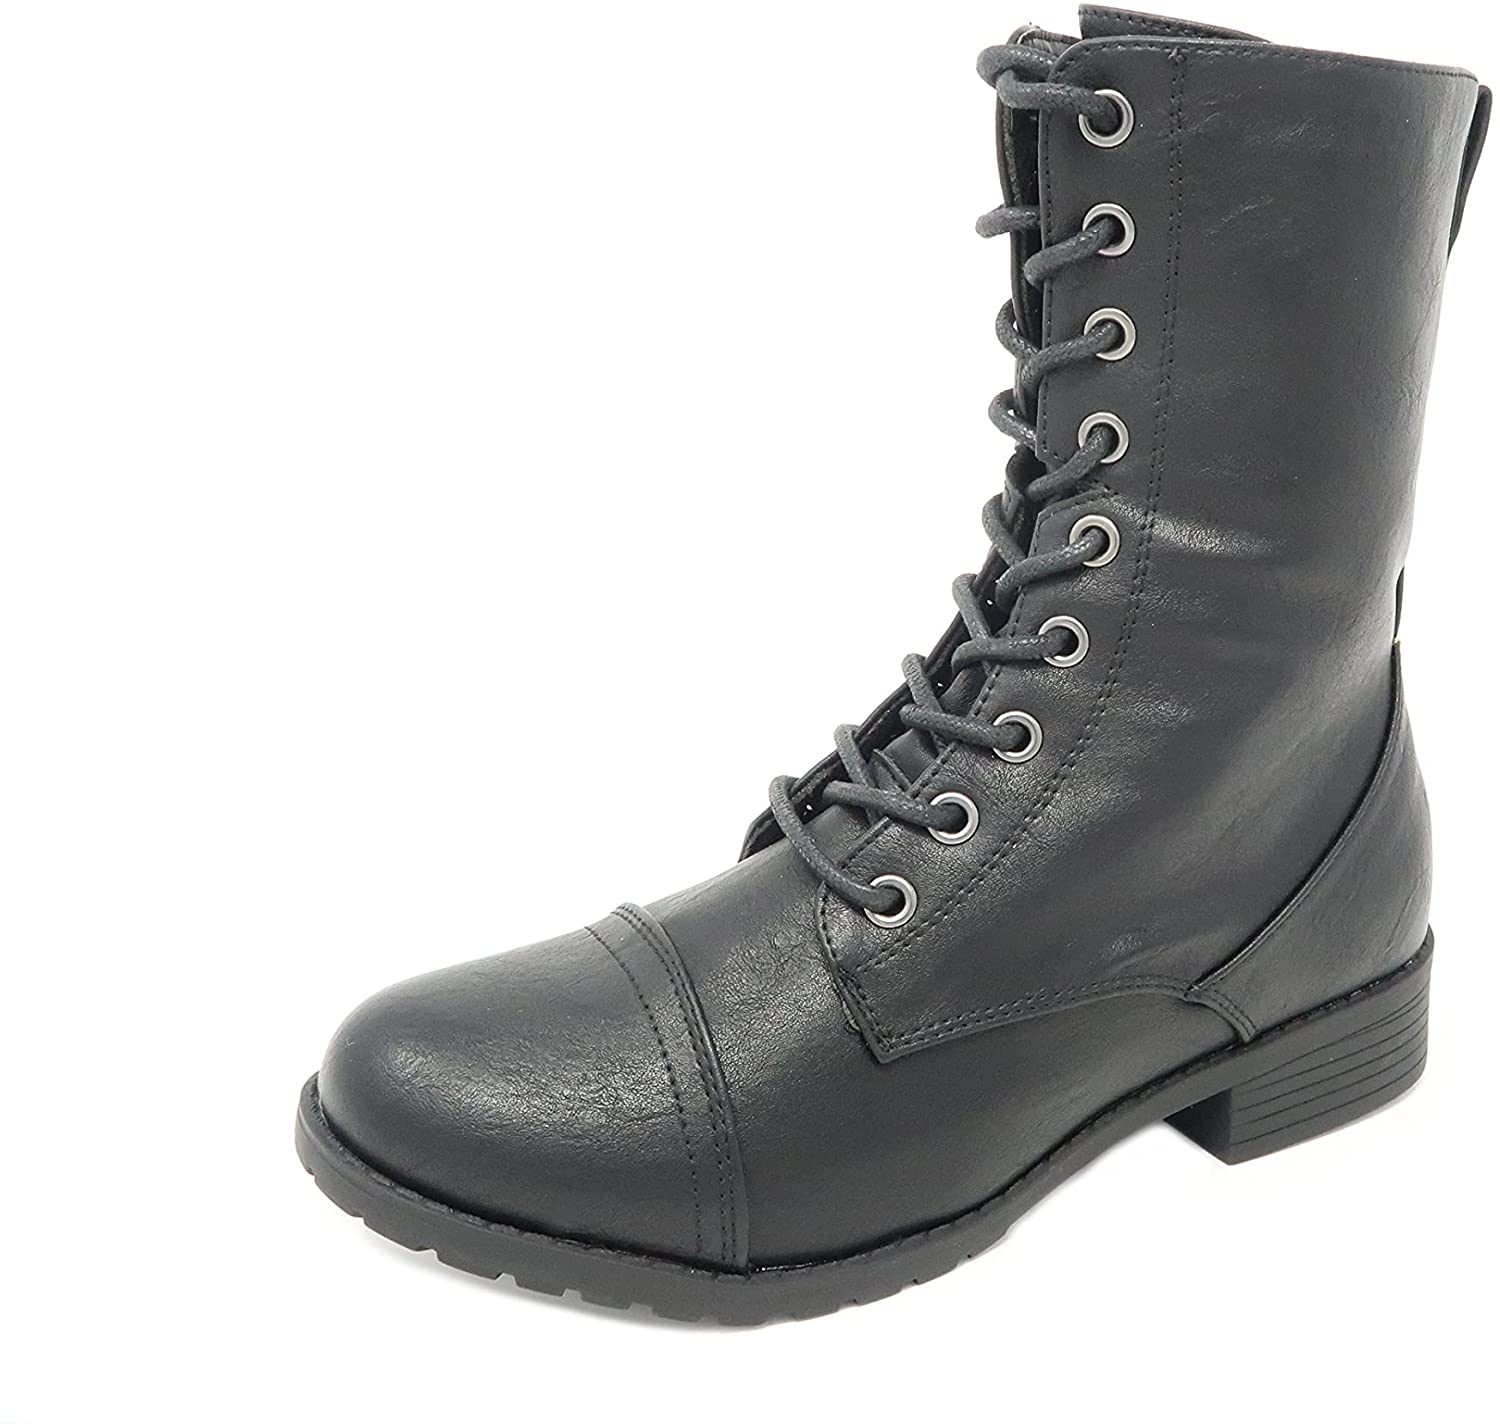 Top Moda Pack-72 Faux Leather Combat Boots Black NEW Women's Size 7 